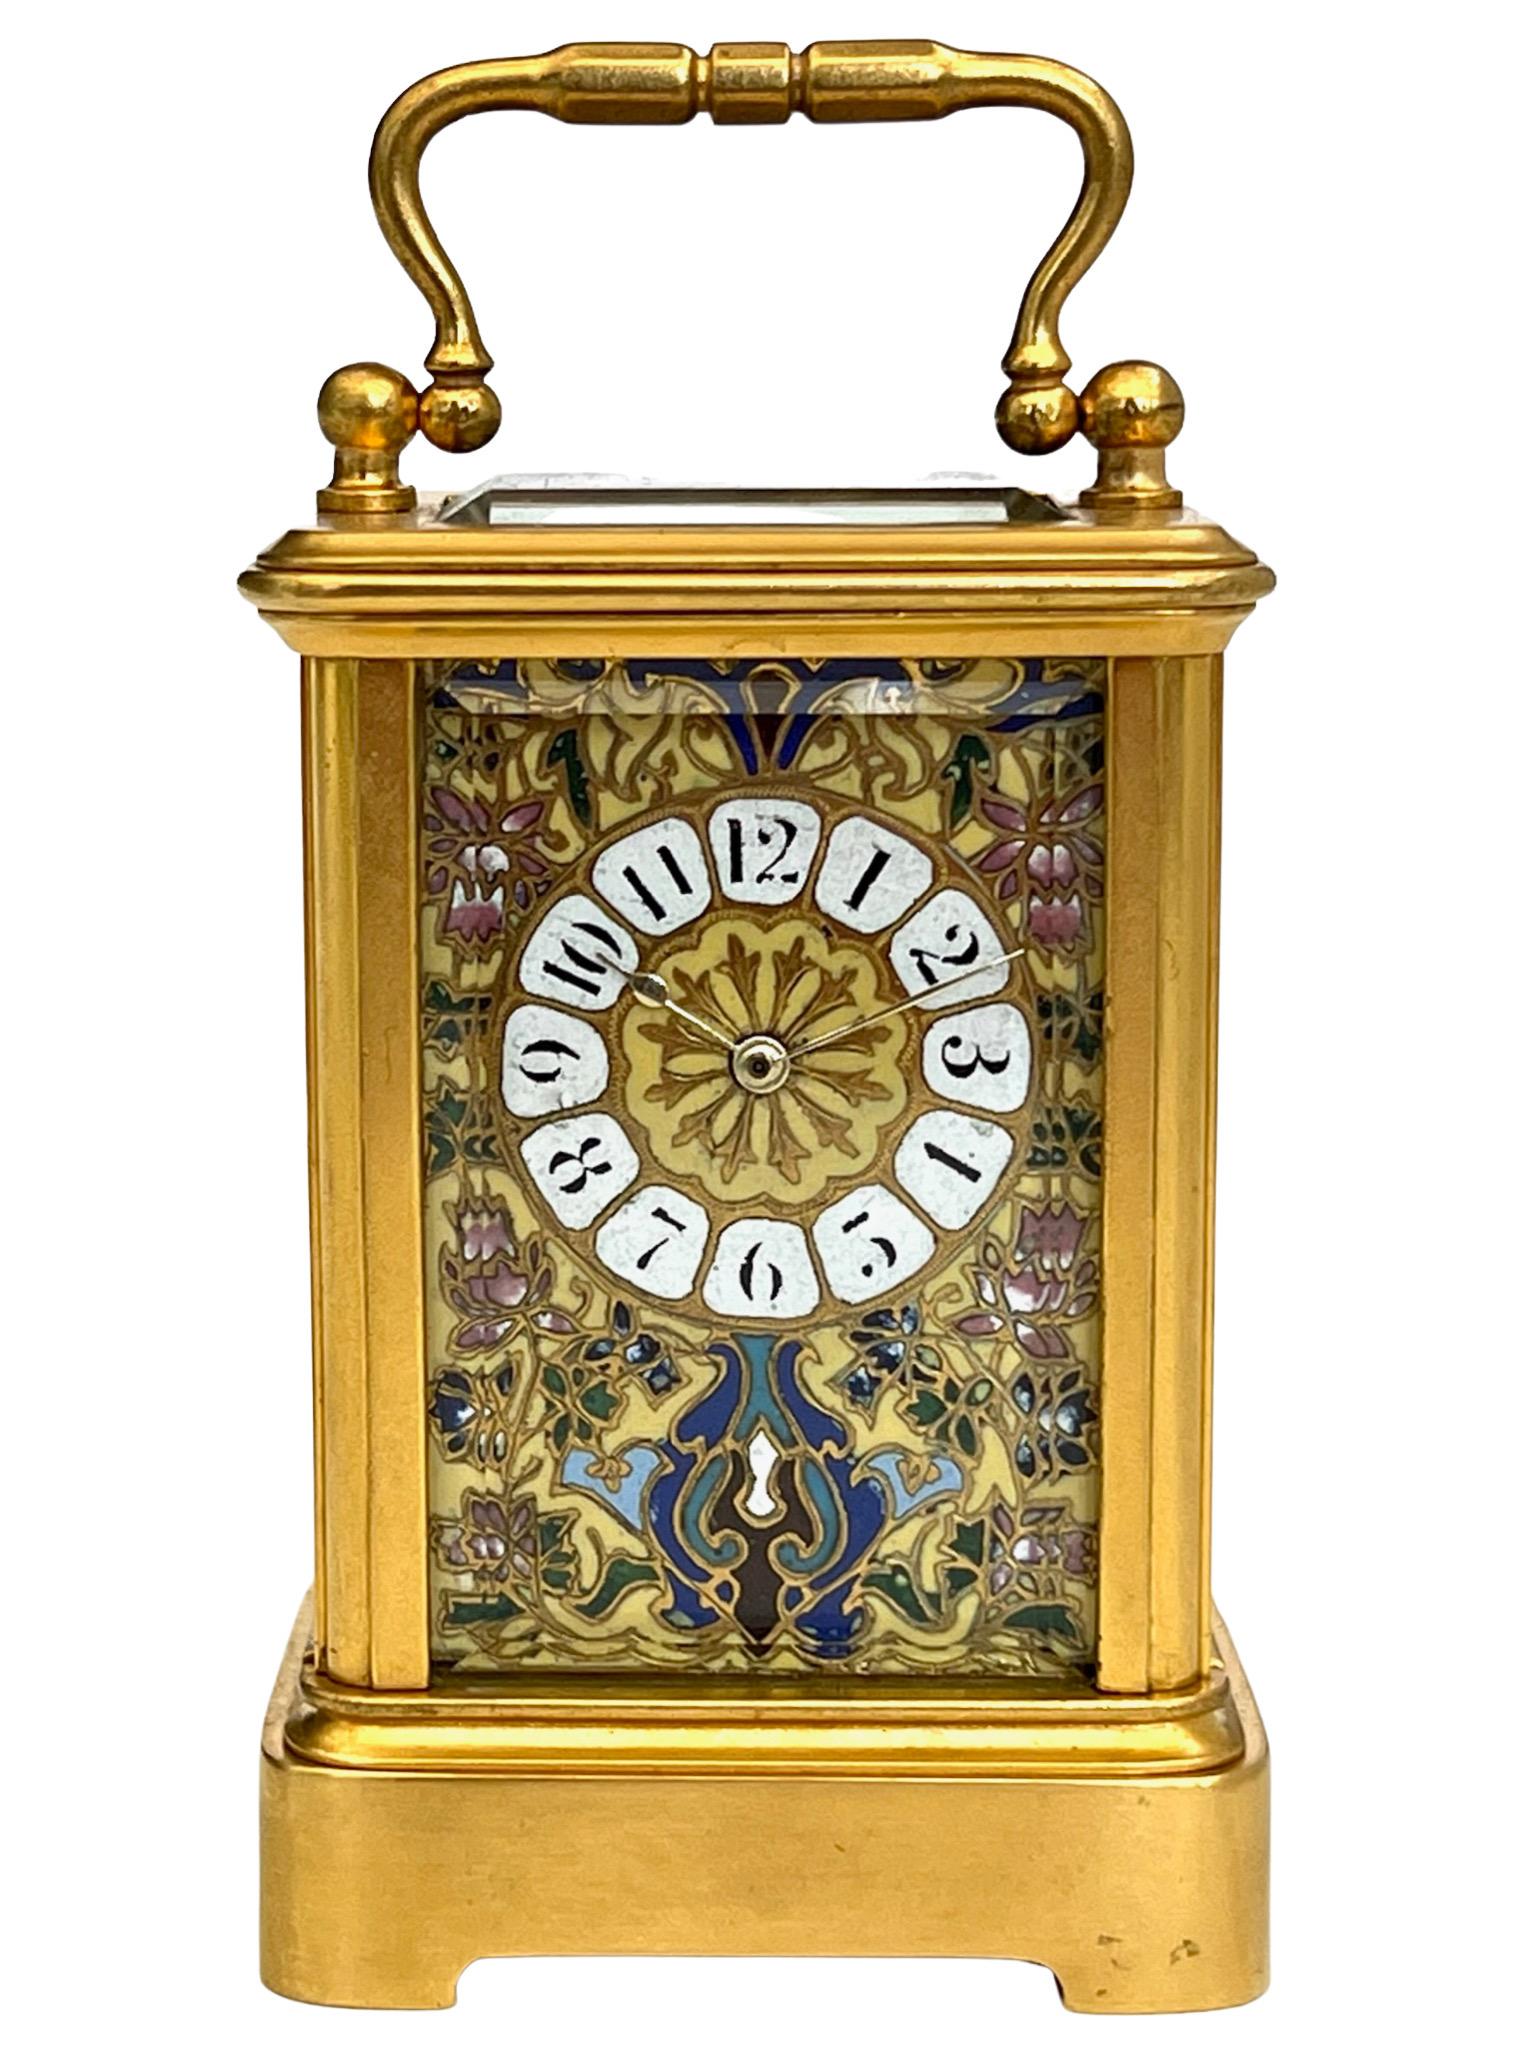 French Miniature Timepiece 8 Day Carriage Clock With Champlevé Enamel Panels In Good Condition For Sale In London, GB